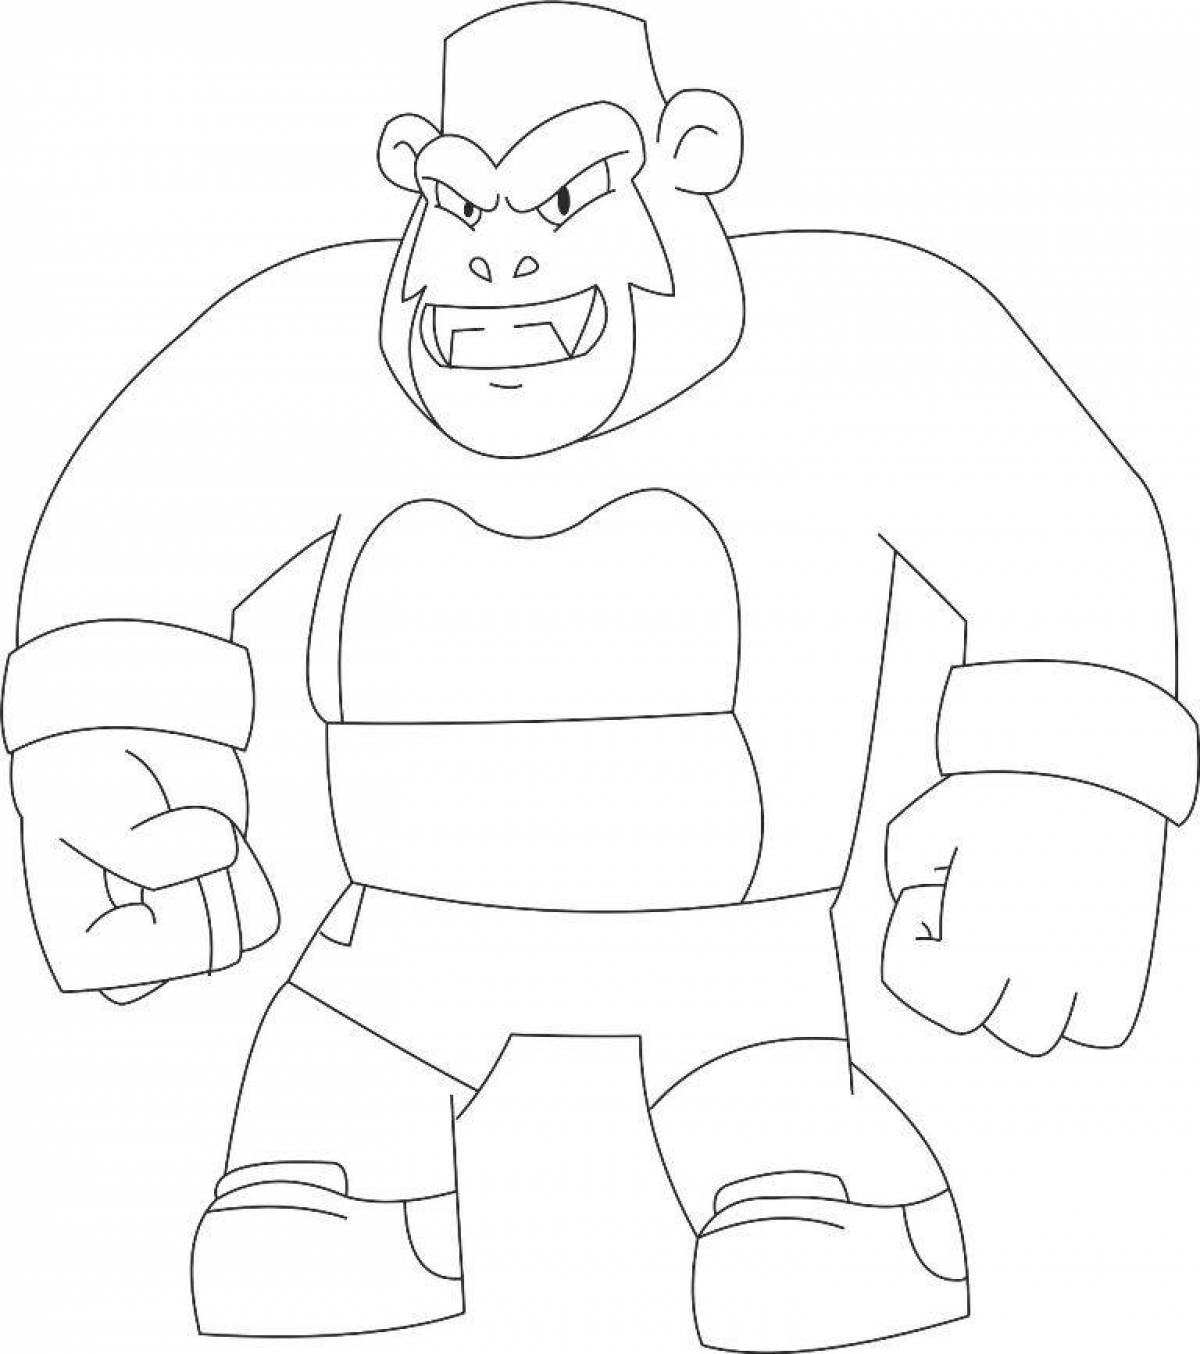 Colorful coloring pages of gujitsu characters